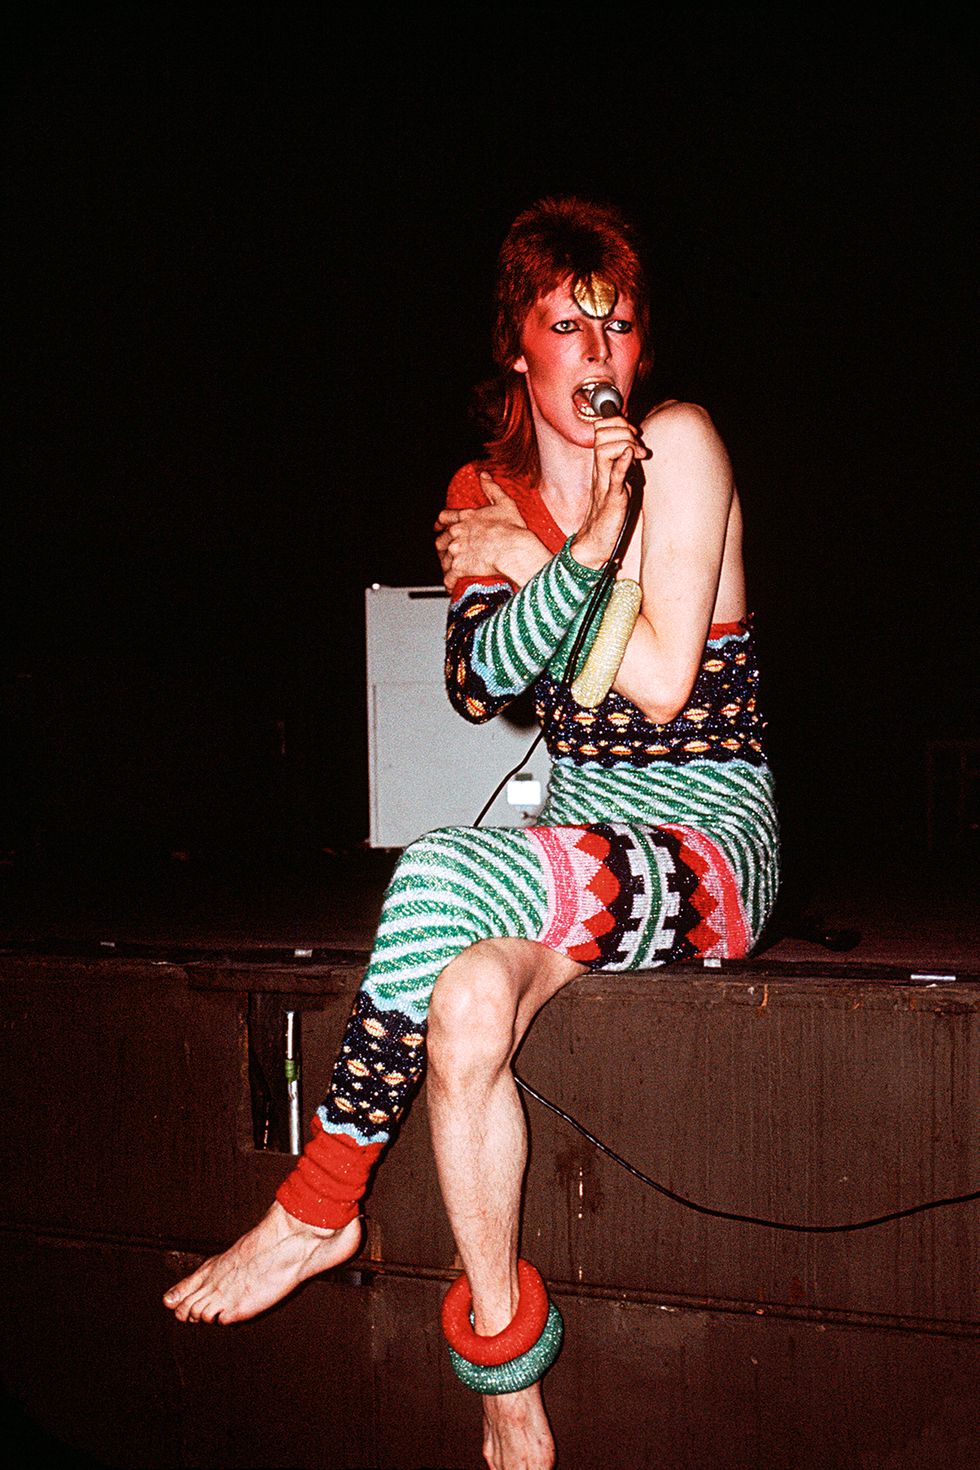 Mick Rock: The rise of David Bowie pictures